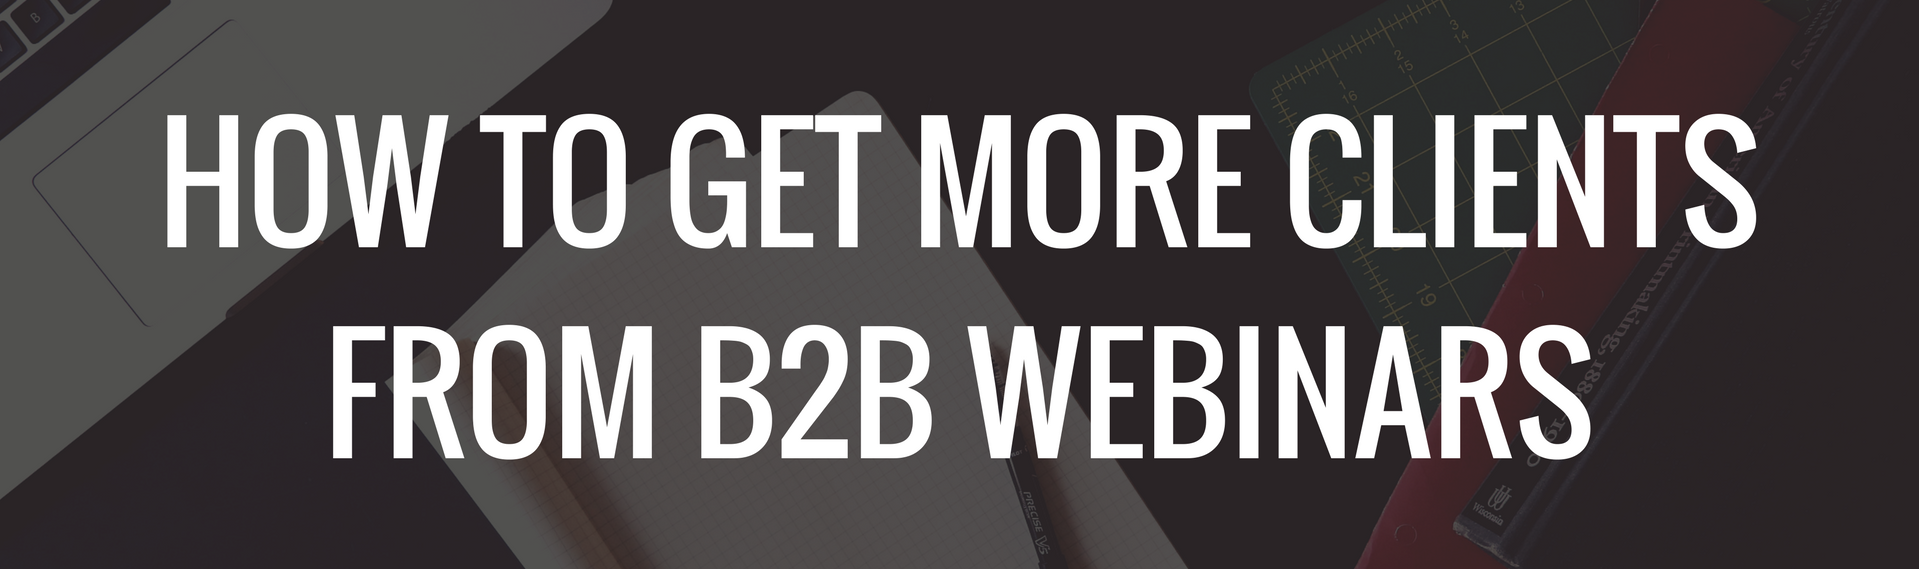 How To Get More Clients From B2B Webinars In 2018 wide